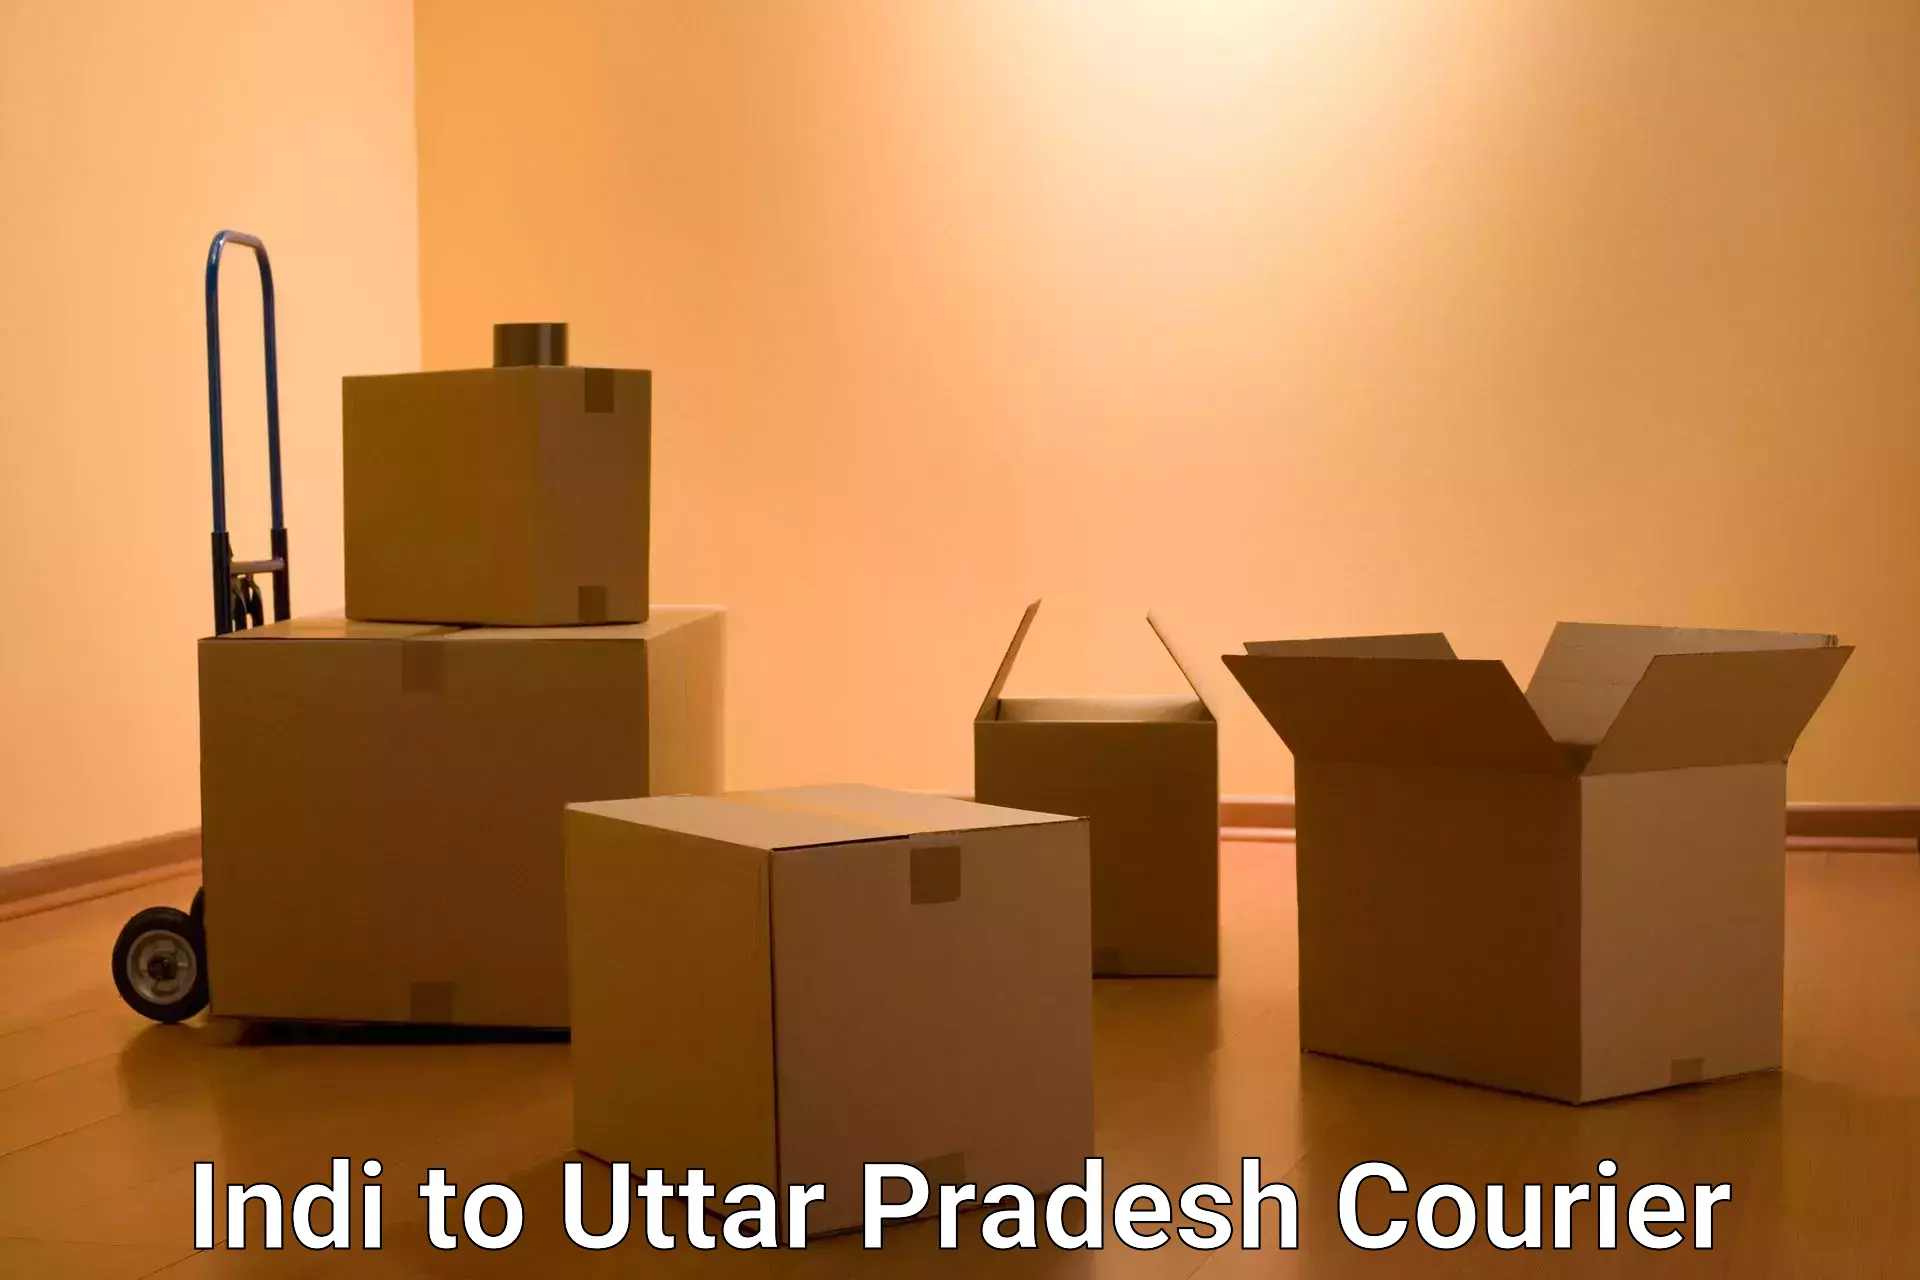 Ocean freight courier in Indi to Akbarpur